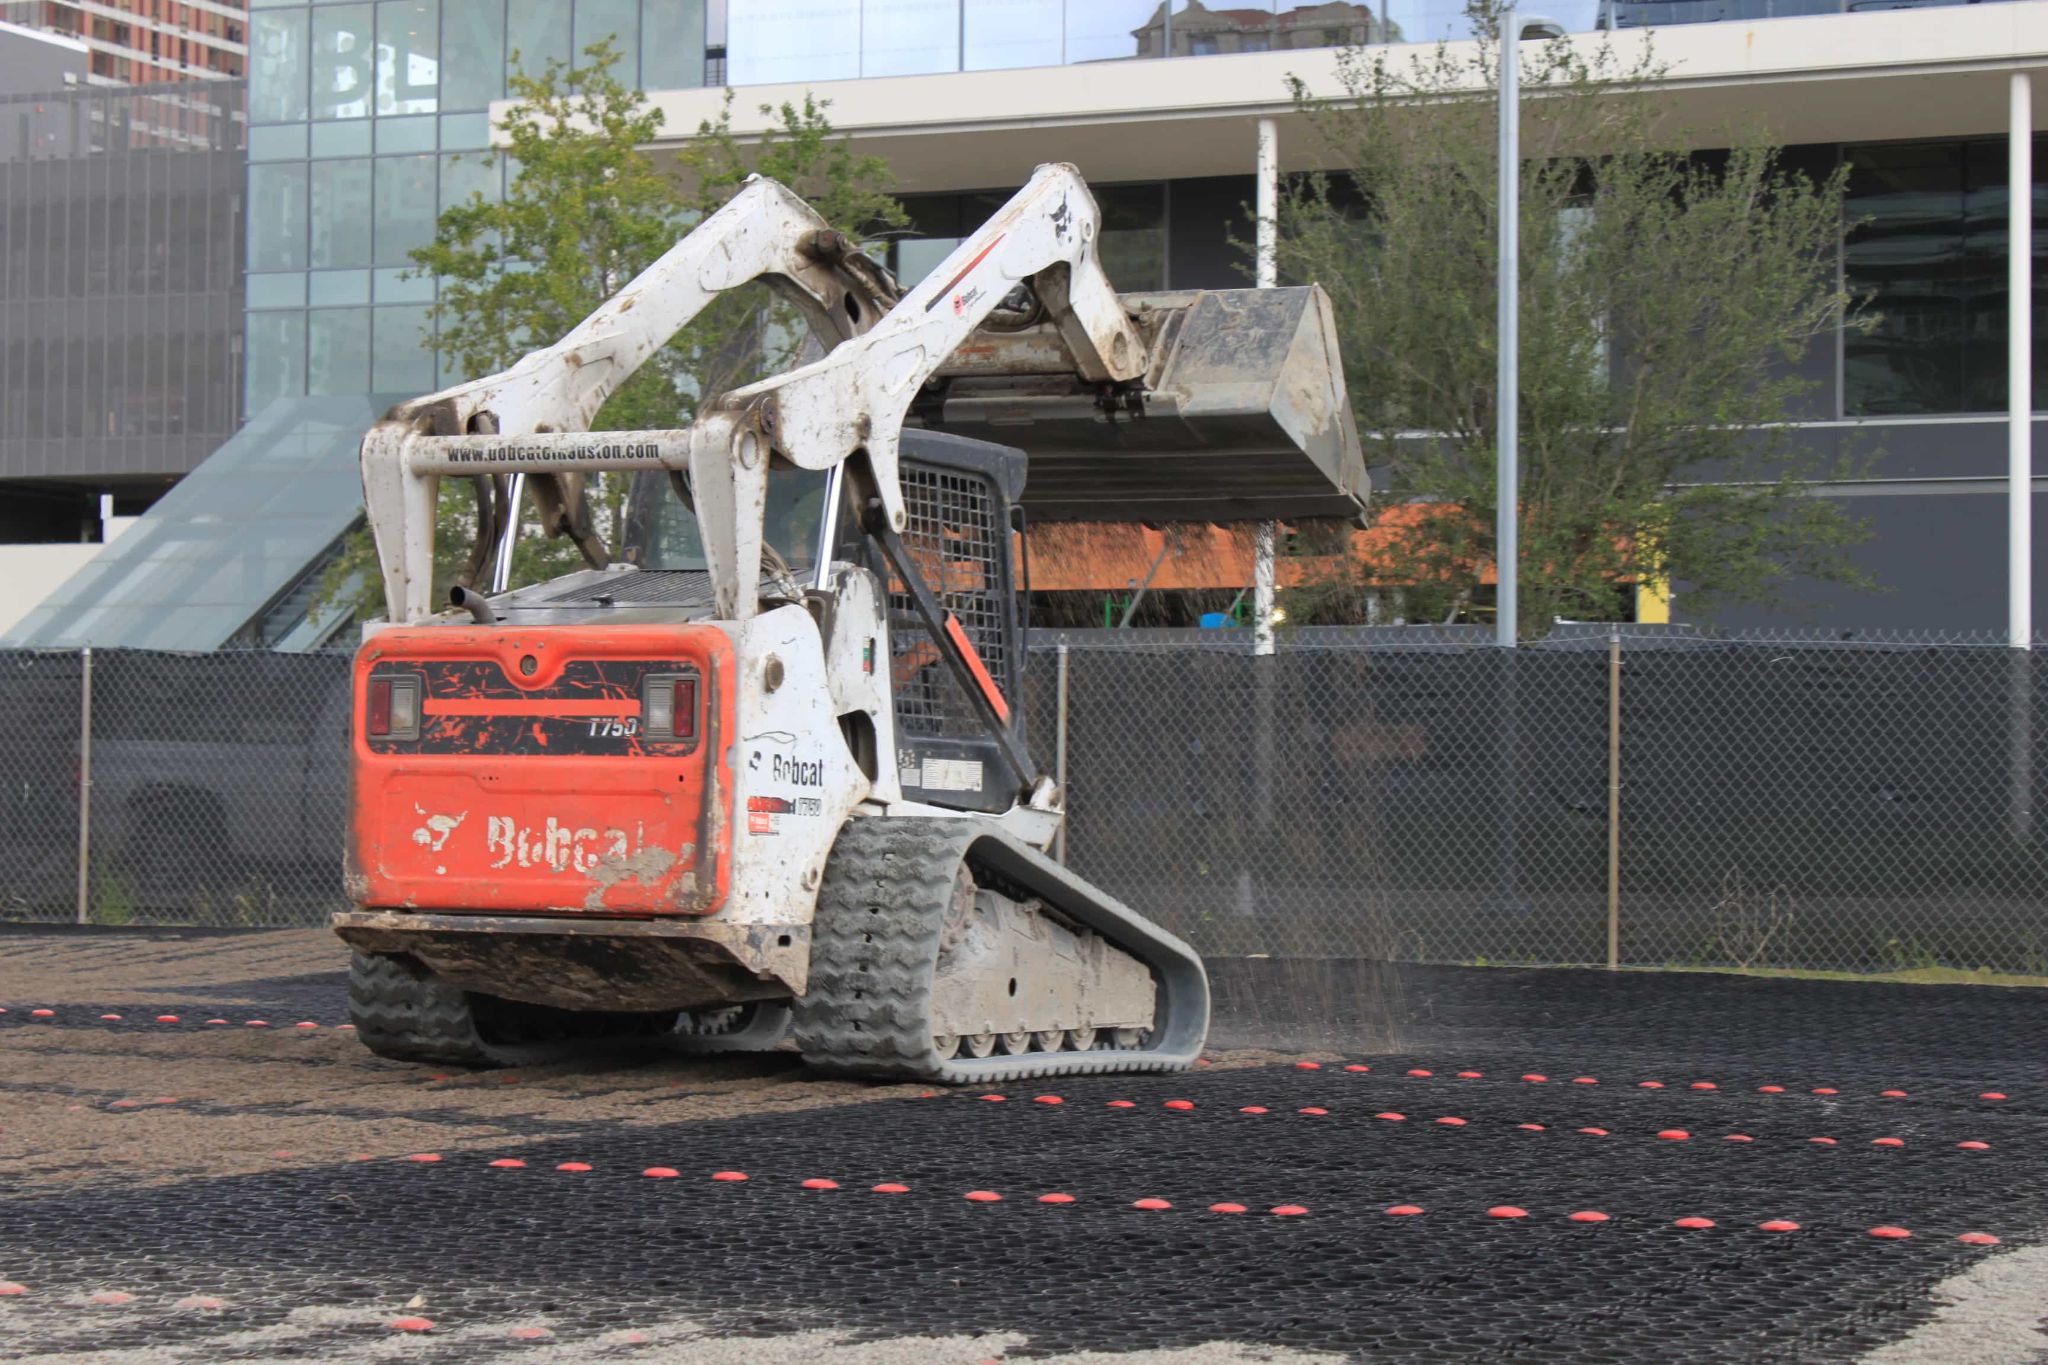 These pavers provide superior grip for large vehicles and equipment